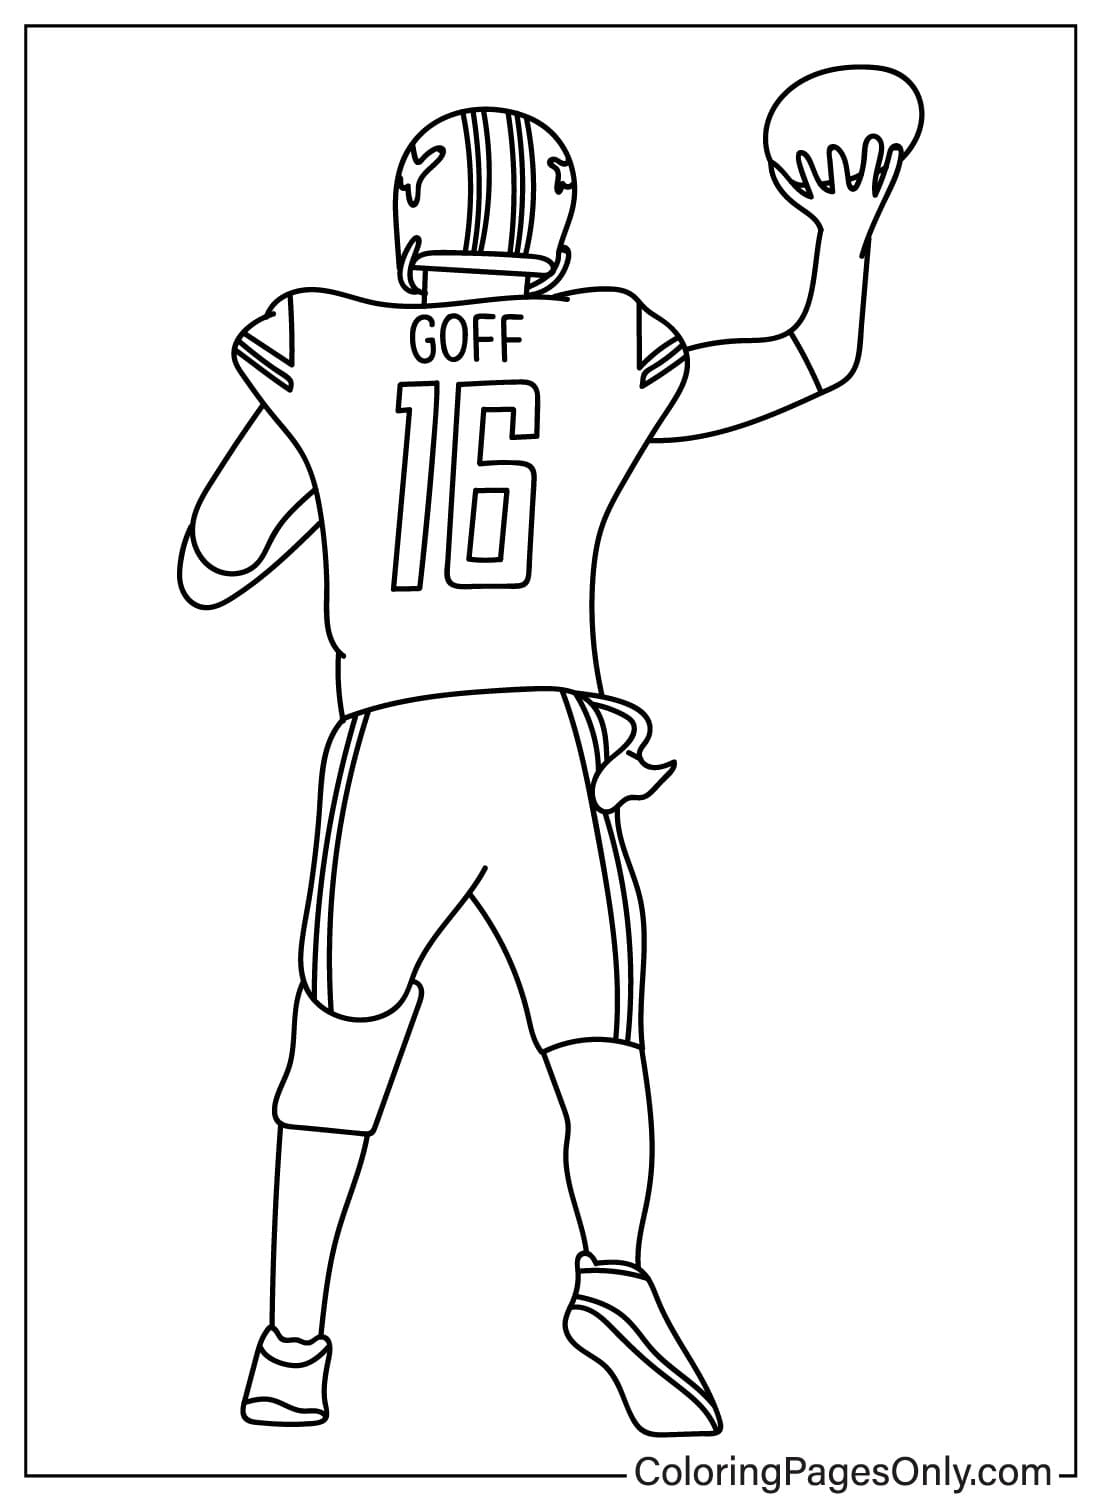 Jared Goff Coloring Page - Free Printable Coloring Pages